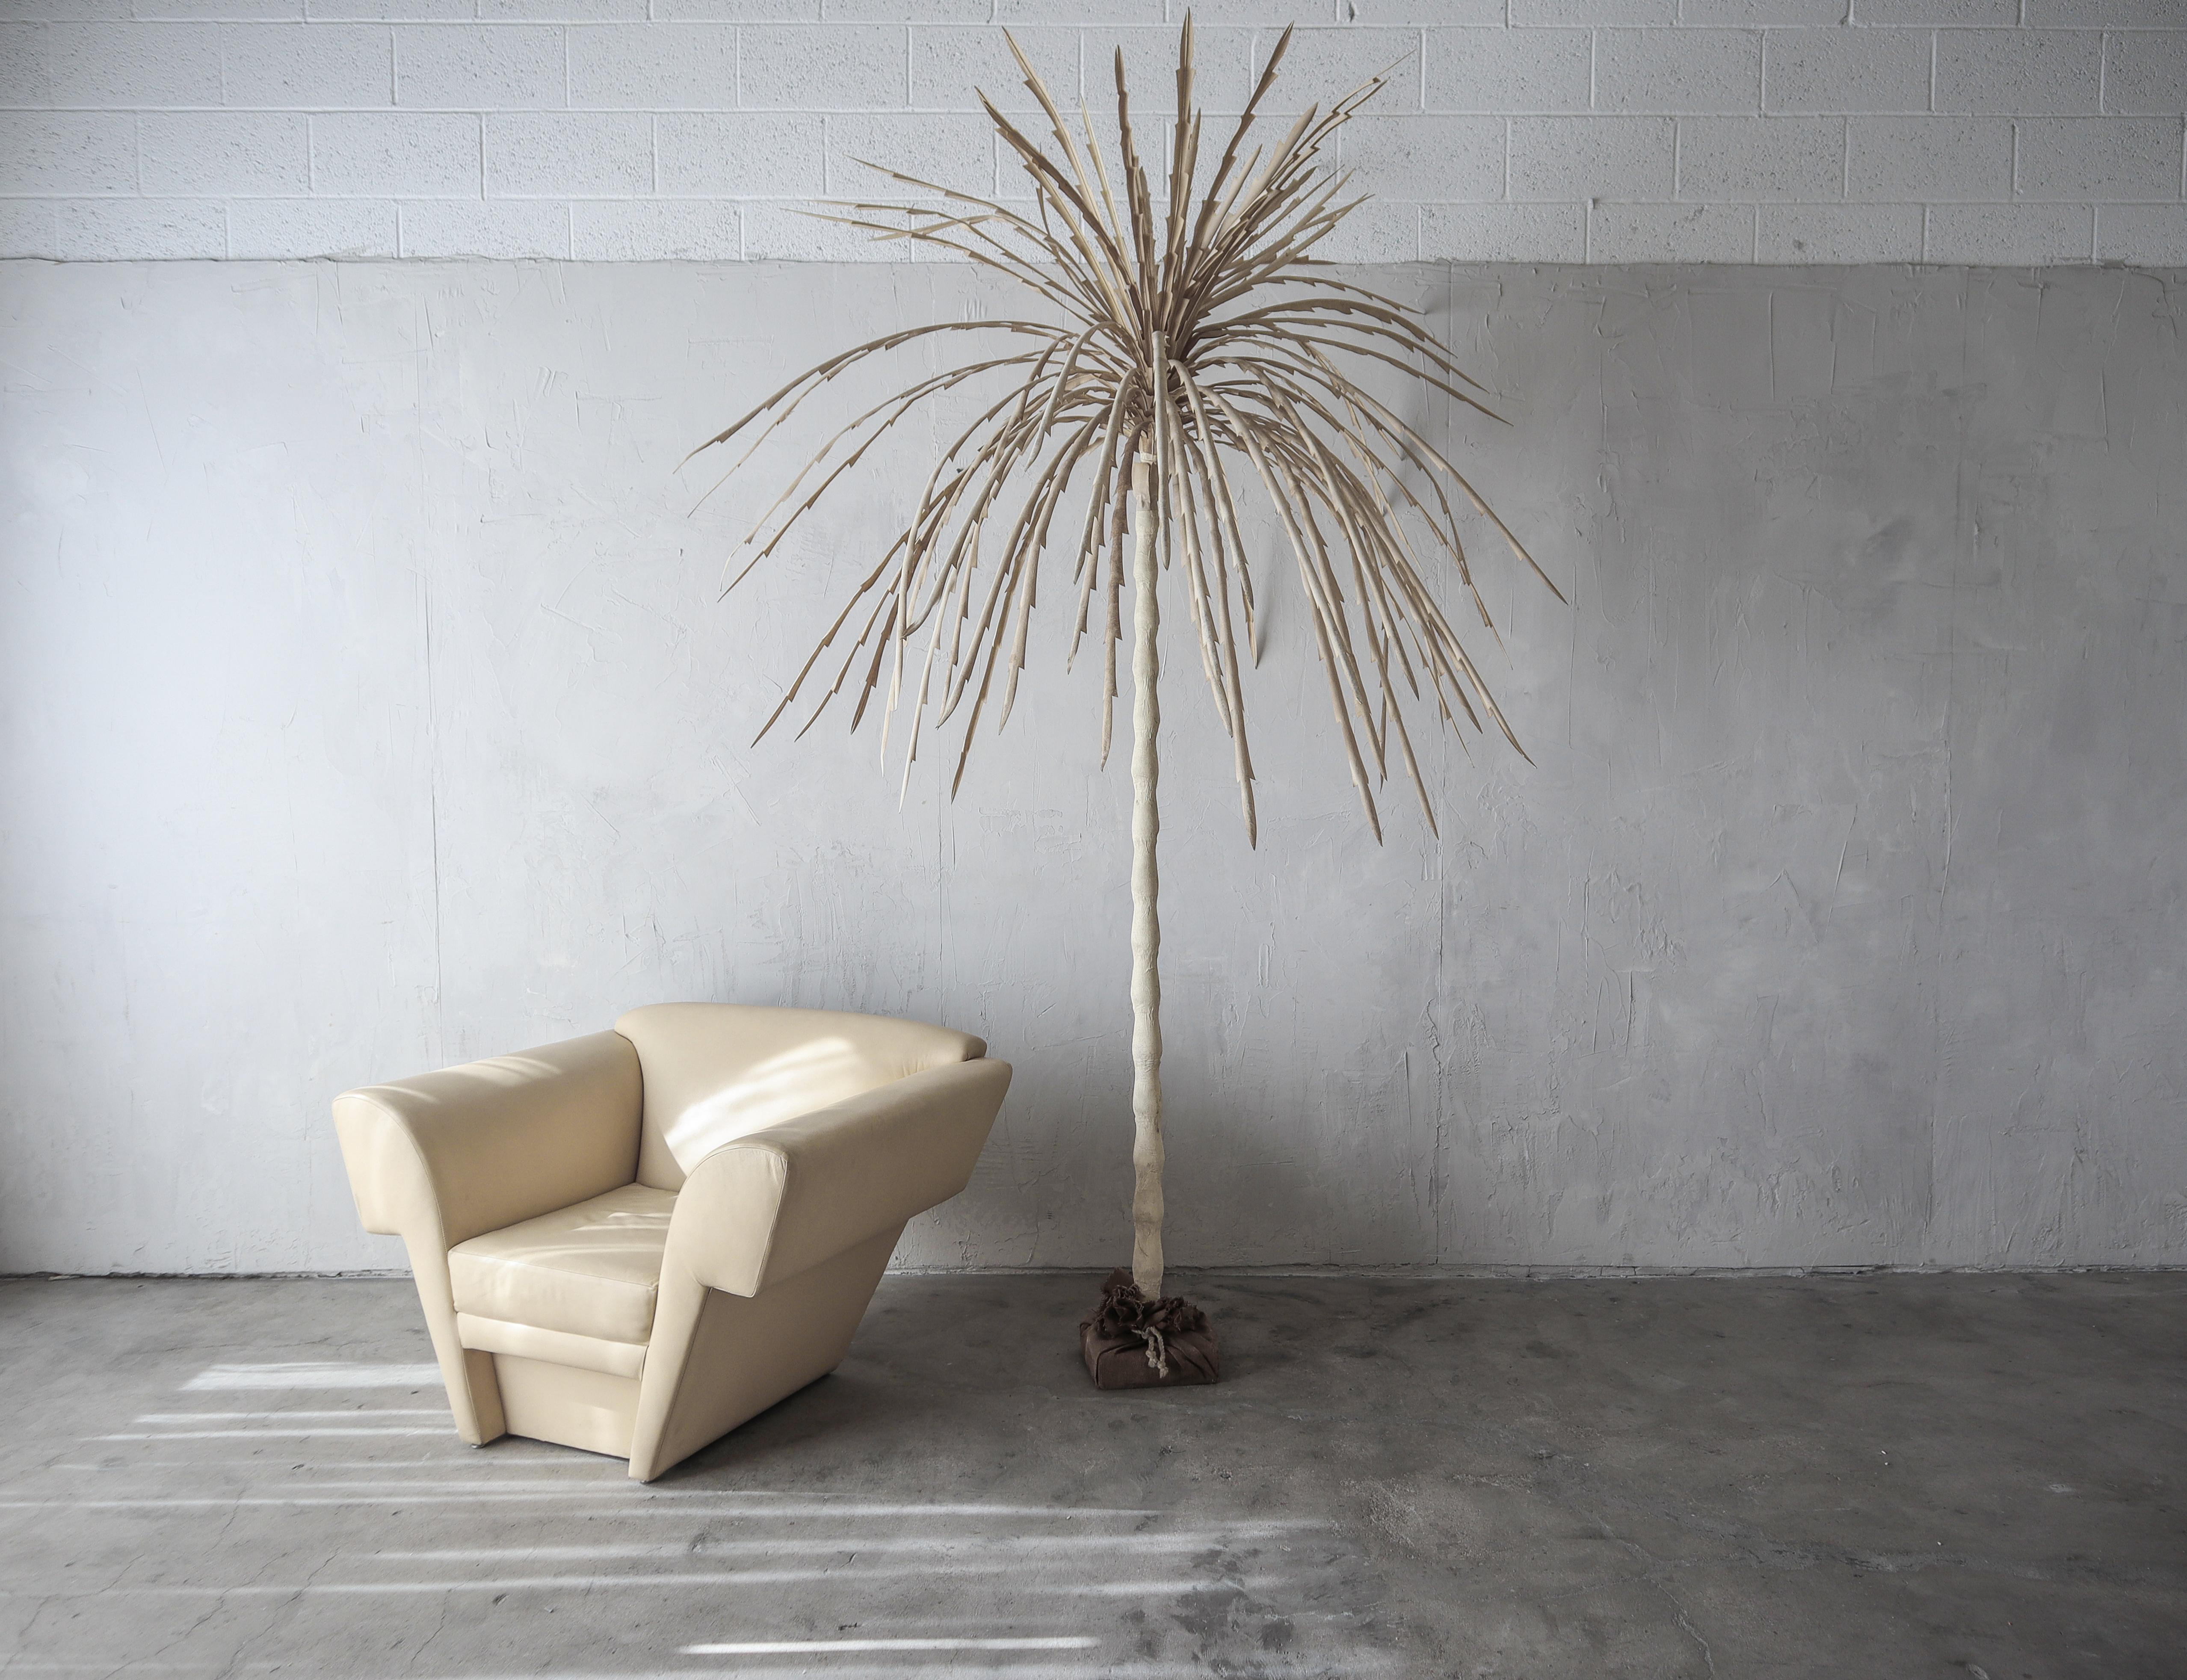 Incredible Post Modern canvas palm tree. Super cool, super sculptural. This tree is large, measuring over 8ft, perfect size to be used as a retail fixture or in a home with high ceilings. Created out of canvas over metal.

Tree has what I'd